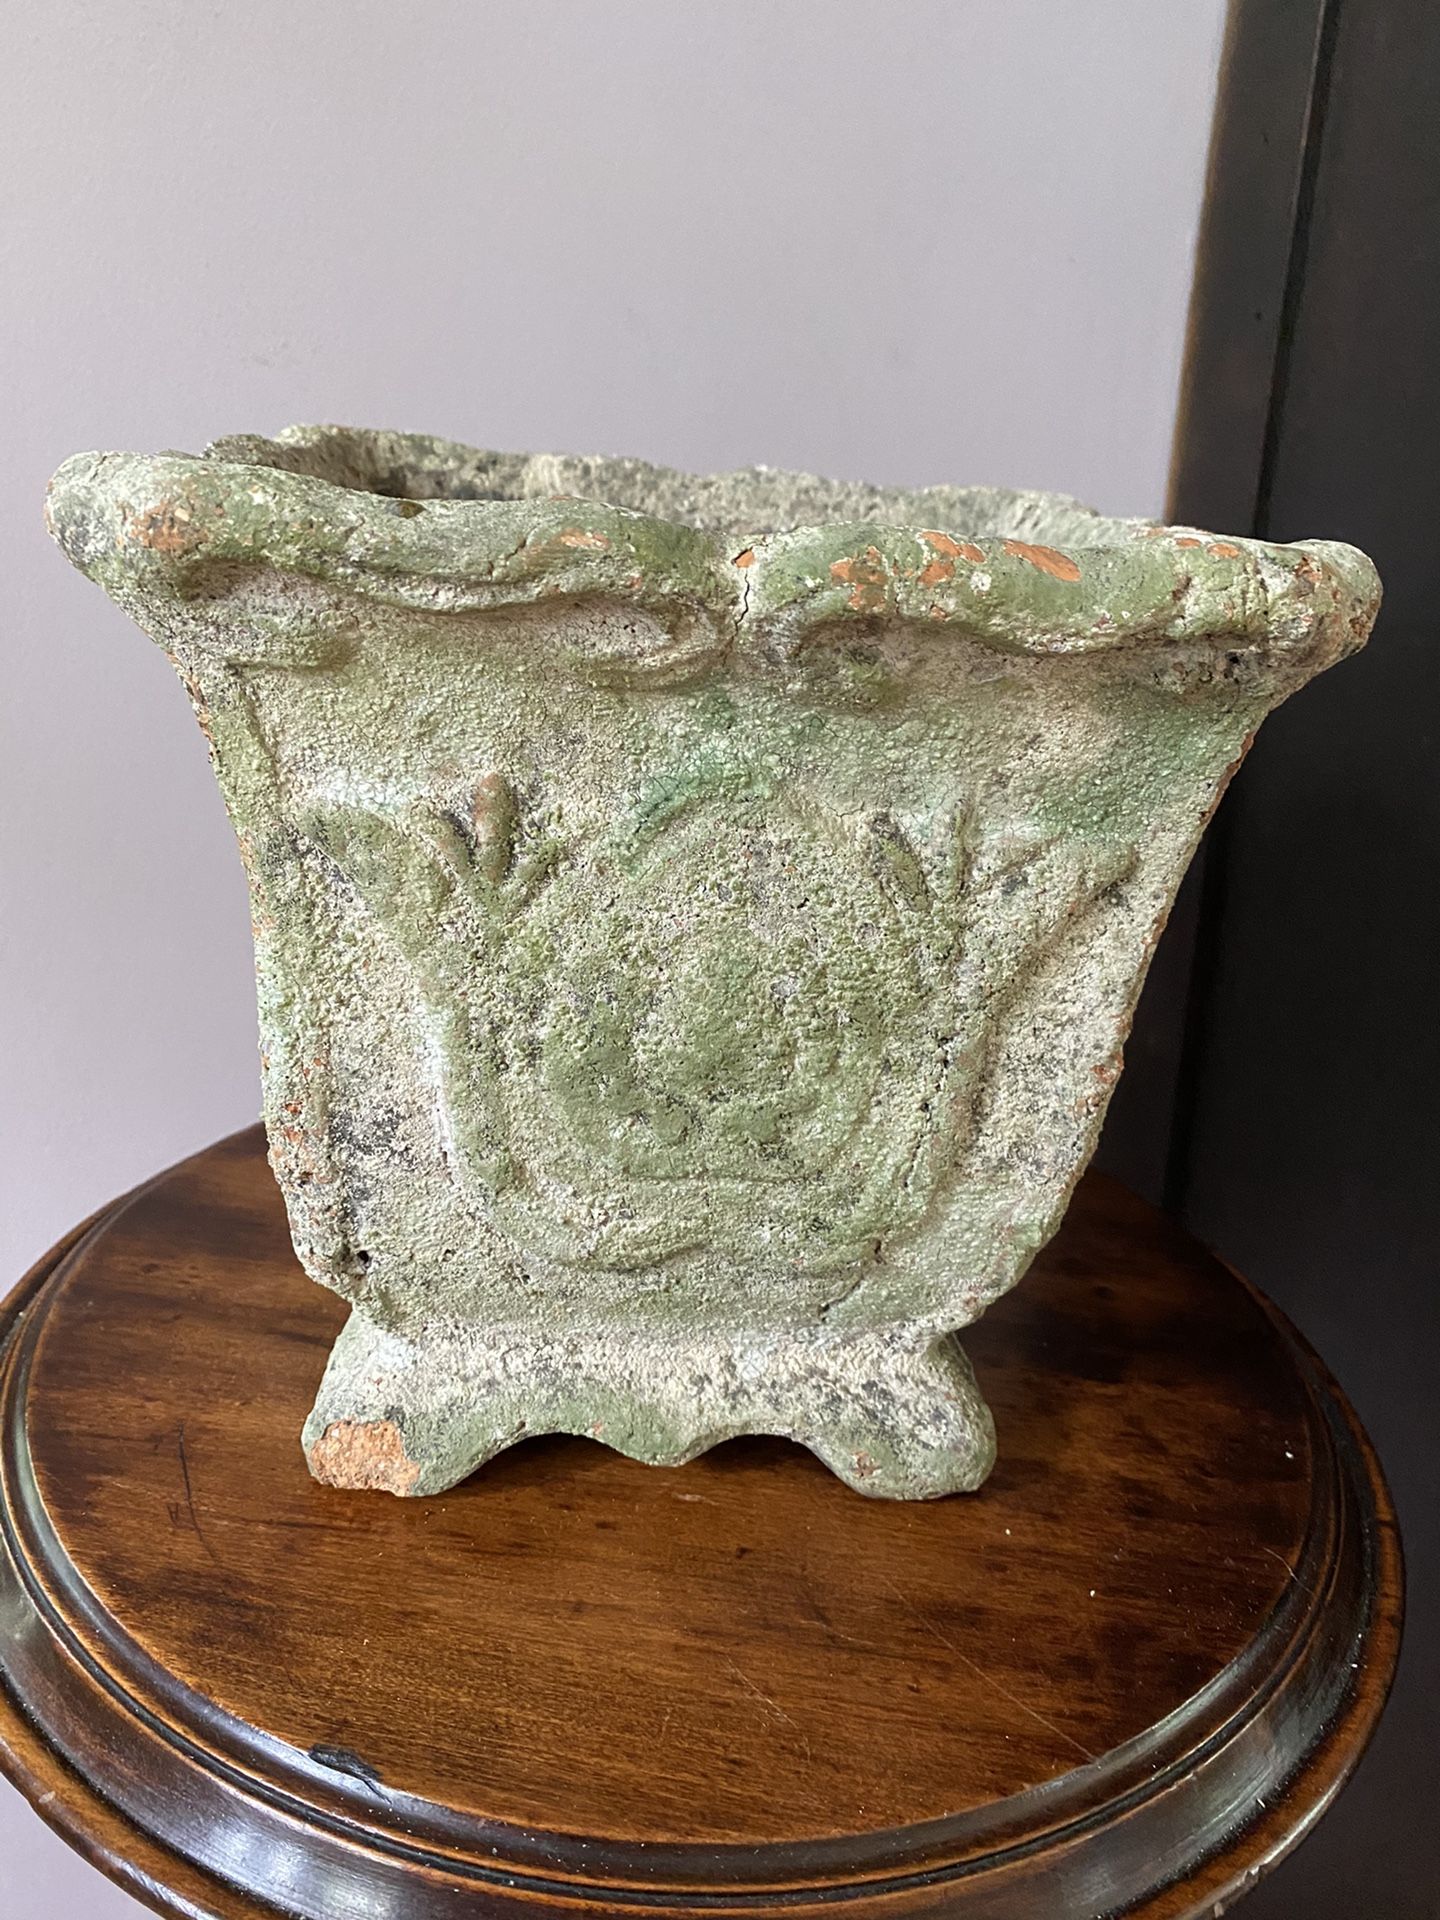 Vintage green terra cotta plant pot with water hole.